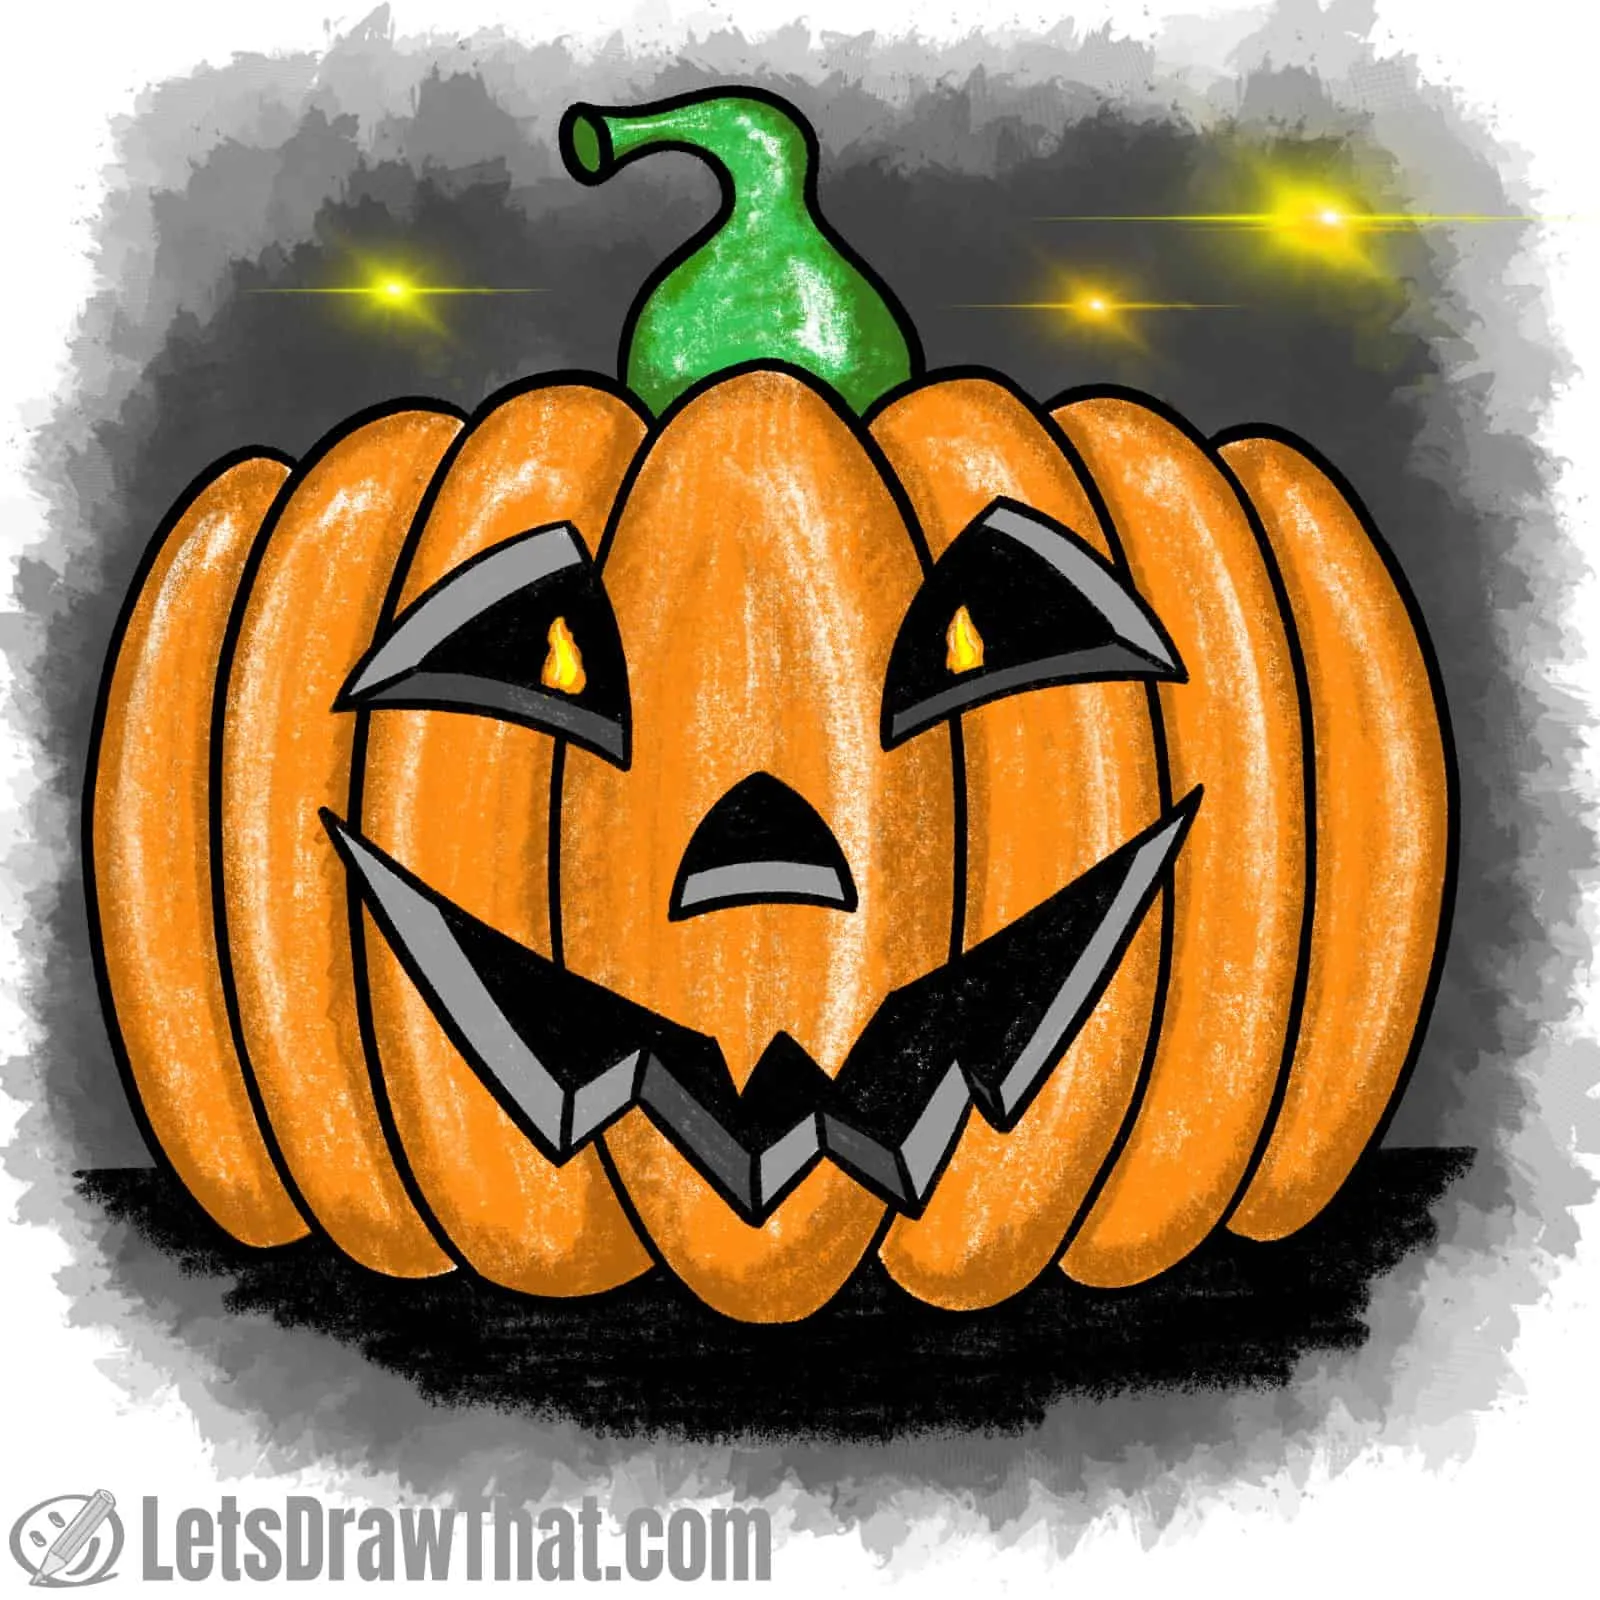 Drawing pumpkin faces: happy pumpkin face drawing coloured-in